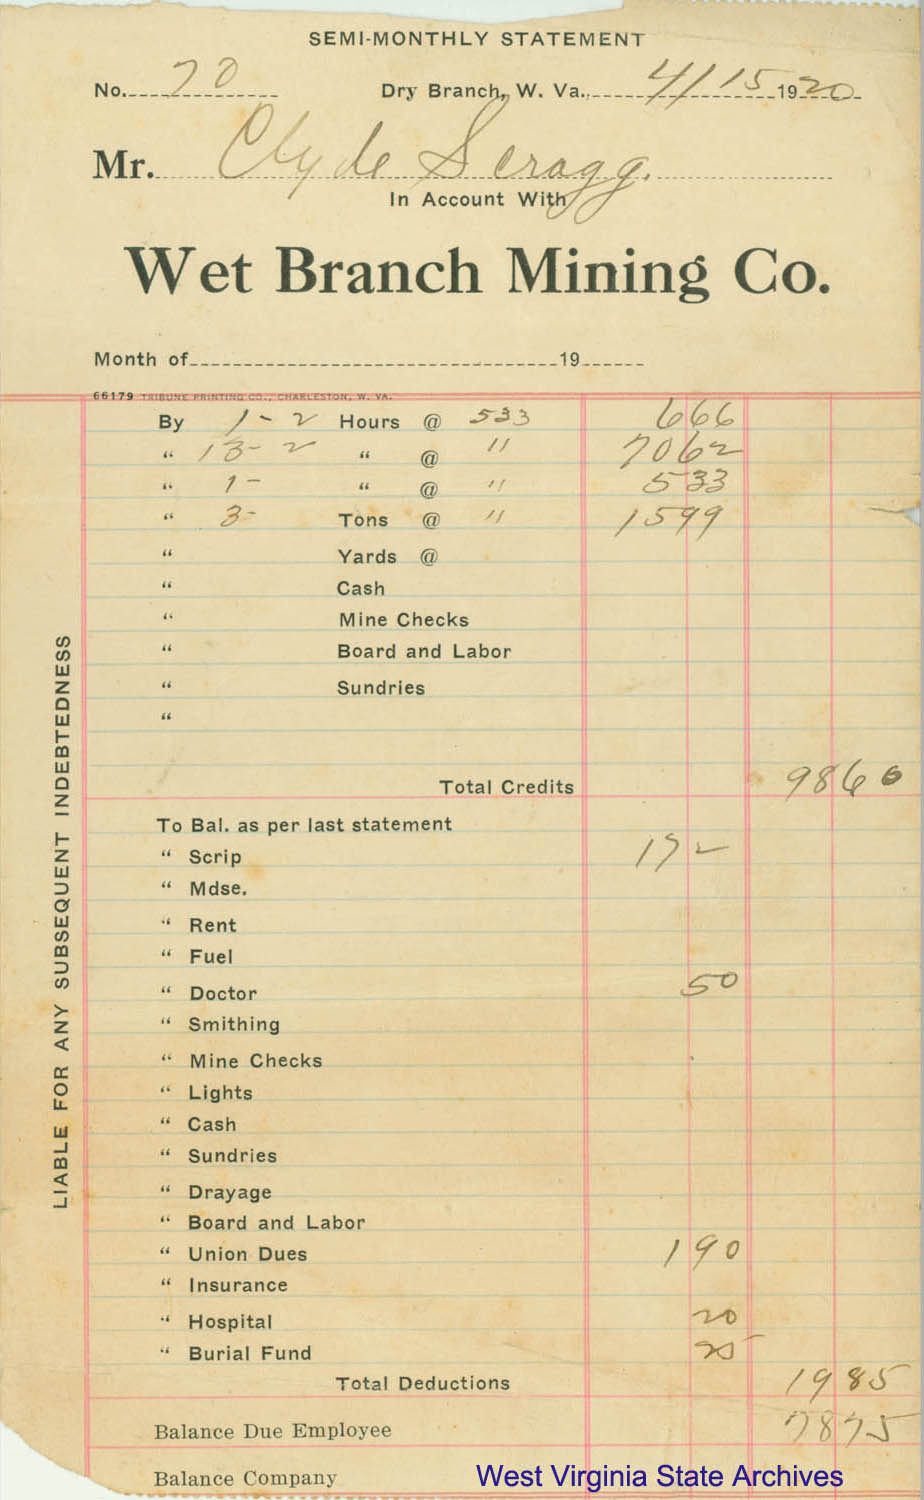 Semi-monthly pay statement from Wet Branch Mining Company for Clyde Scragg, 1920. (Ms2006-001)